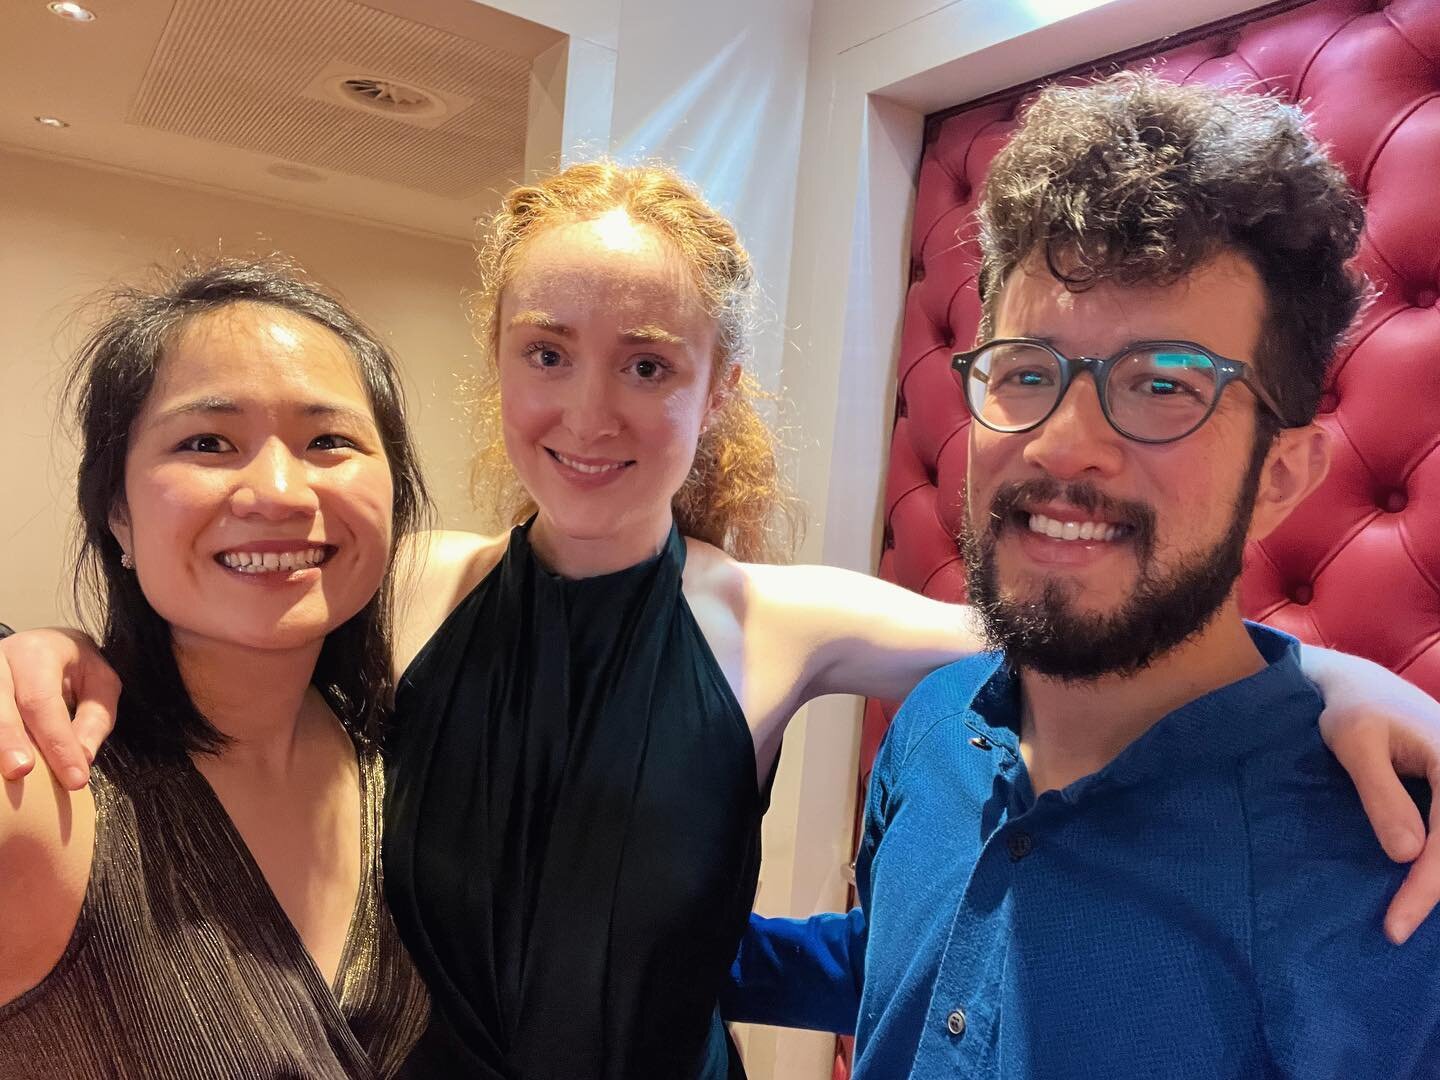 Post-concert glow after our Concertgebouw recital in Amsterdam yesterday! 5 concerts across the Netherlands in 5 days felt like quite the travel and stamina feat with a substantial program on top of 5-9 hours of travel some days. It managed to be a t